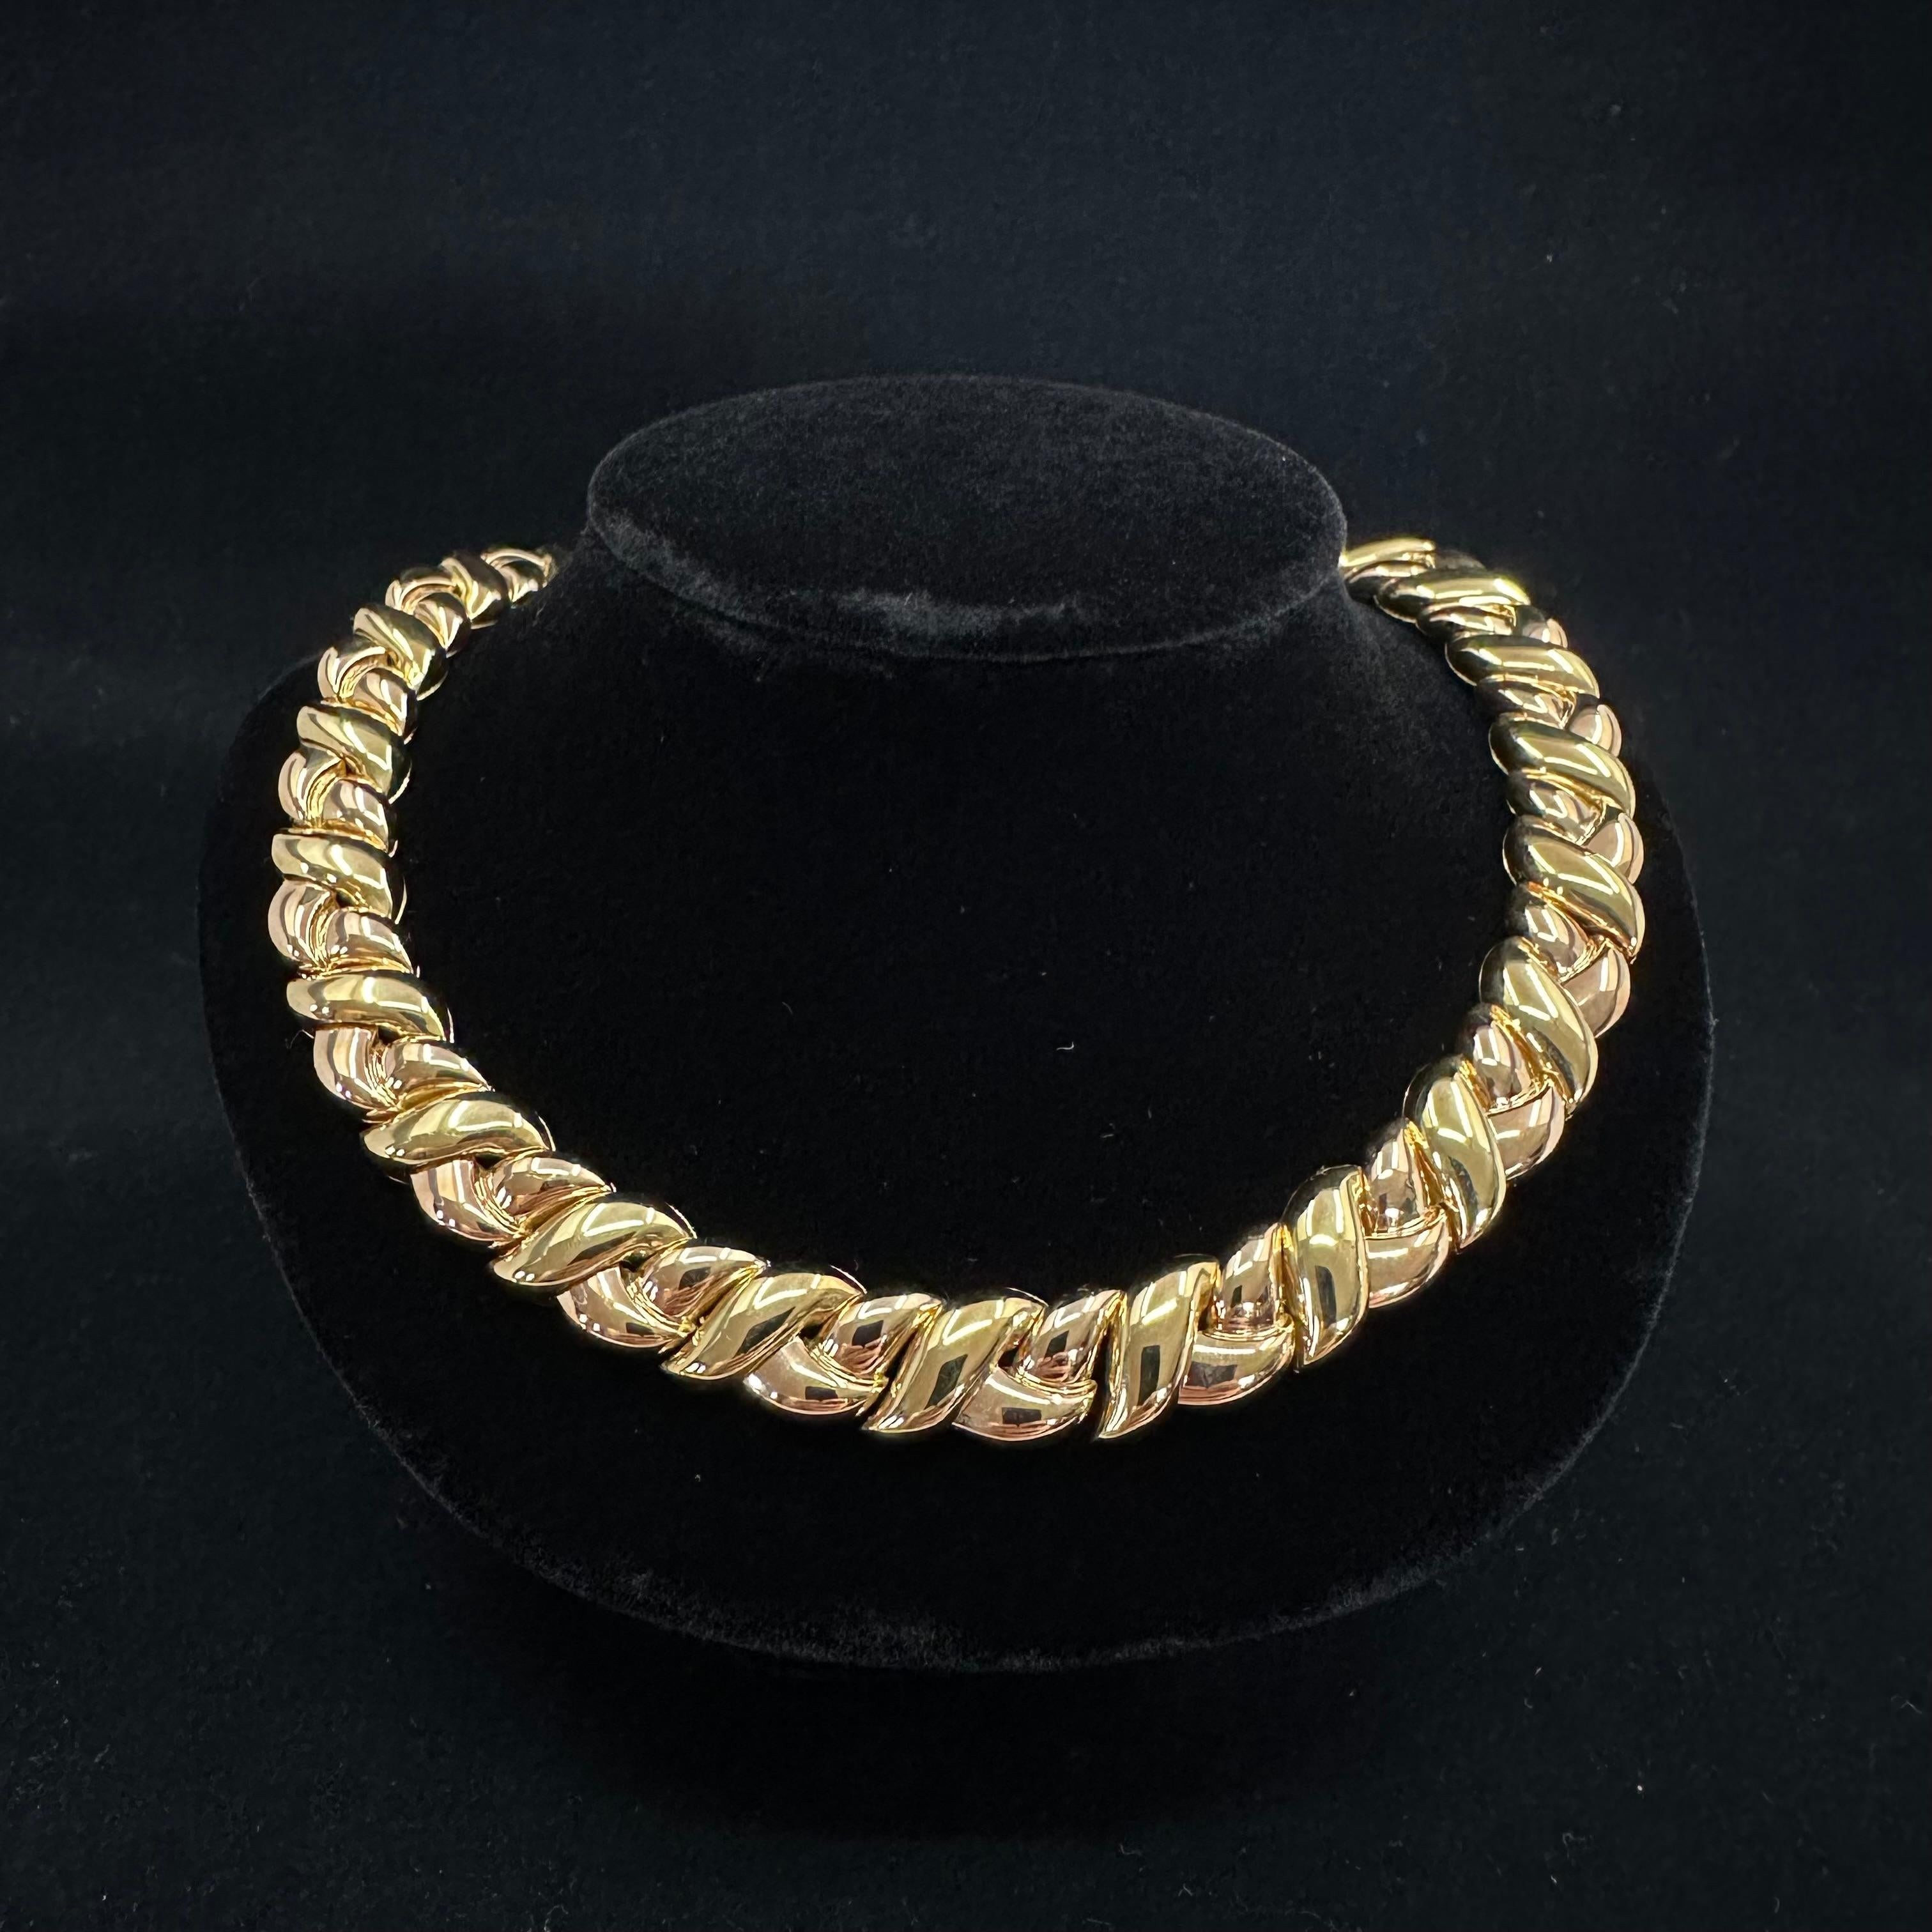 Vintage 1980s Van Cleef and Arpels yellow gold choker necklace. This variation is for a medium size neckline the necklace is 16 inches in length and 11 millimeters in with contour links of 18 karat yellow gold hallmark Van Cleef and Arpels with